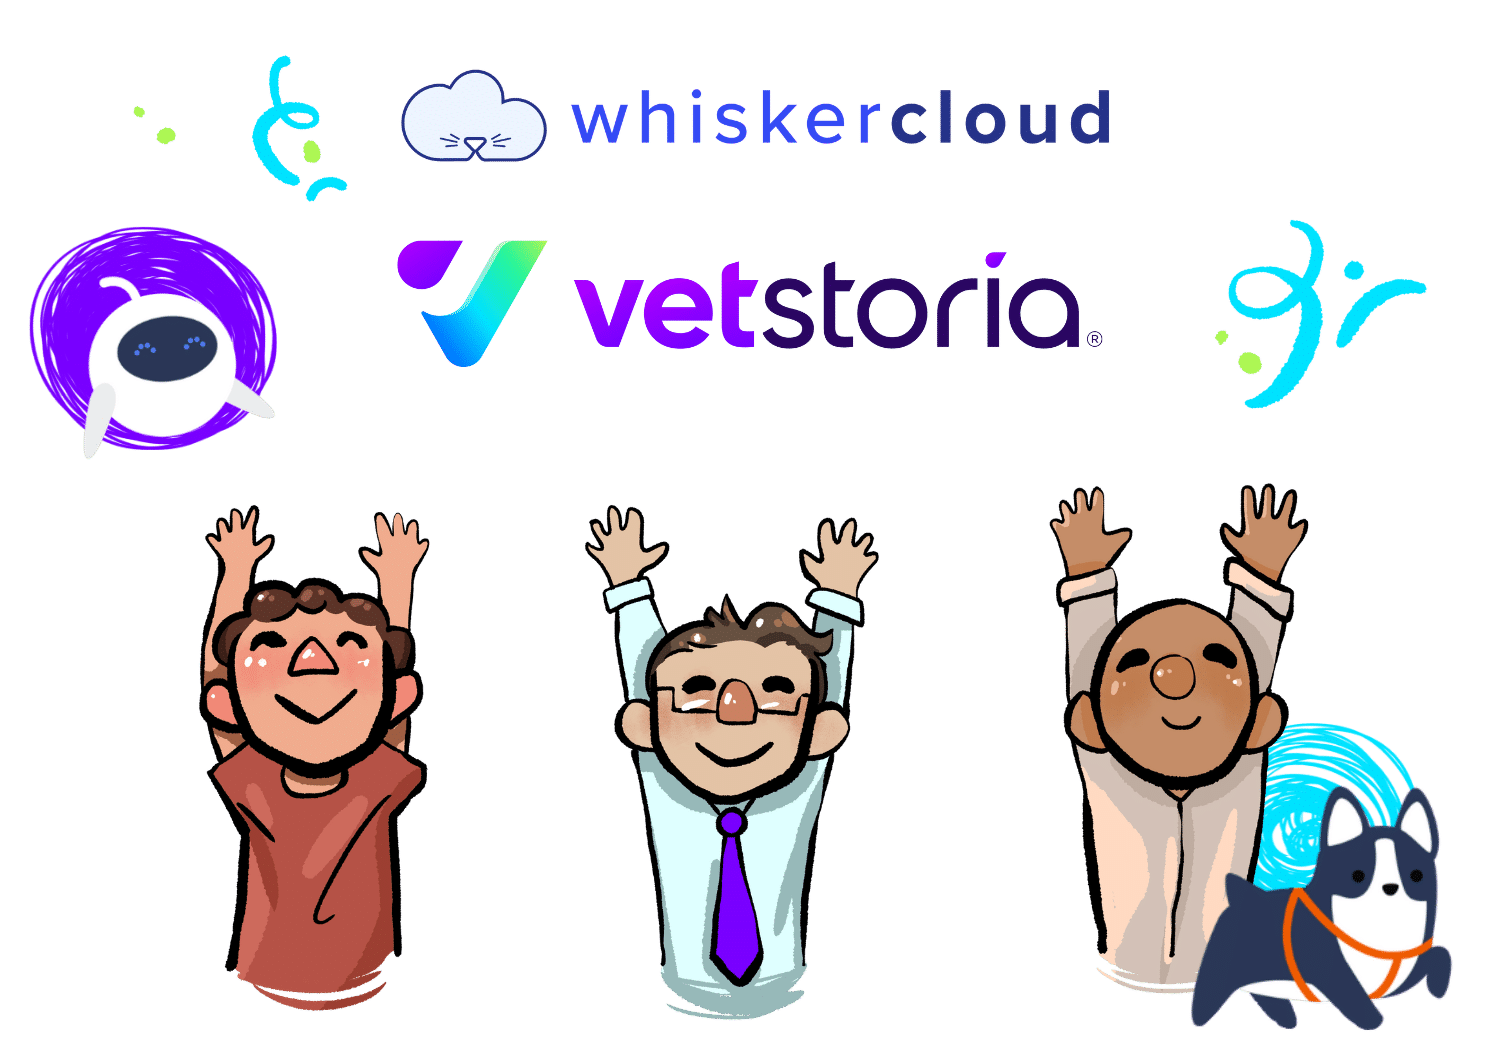 Vetstoria and Whiskercloud